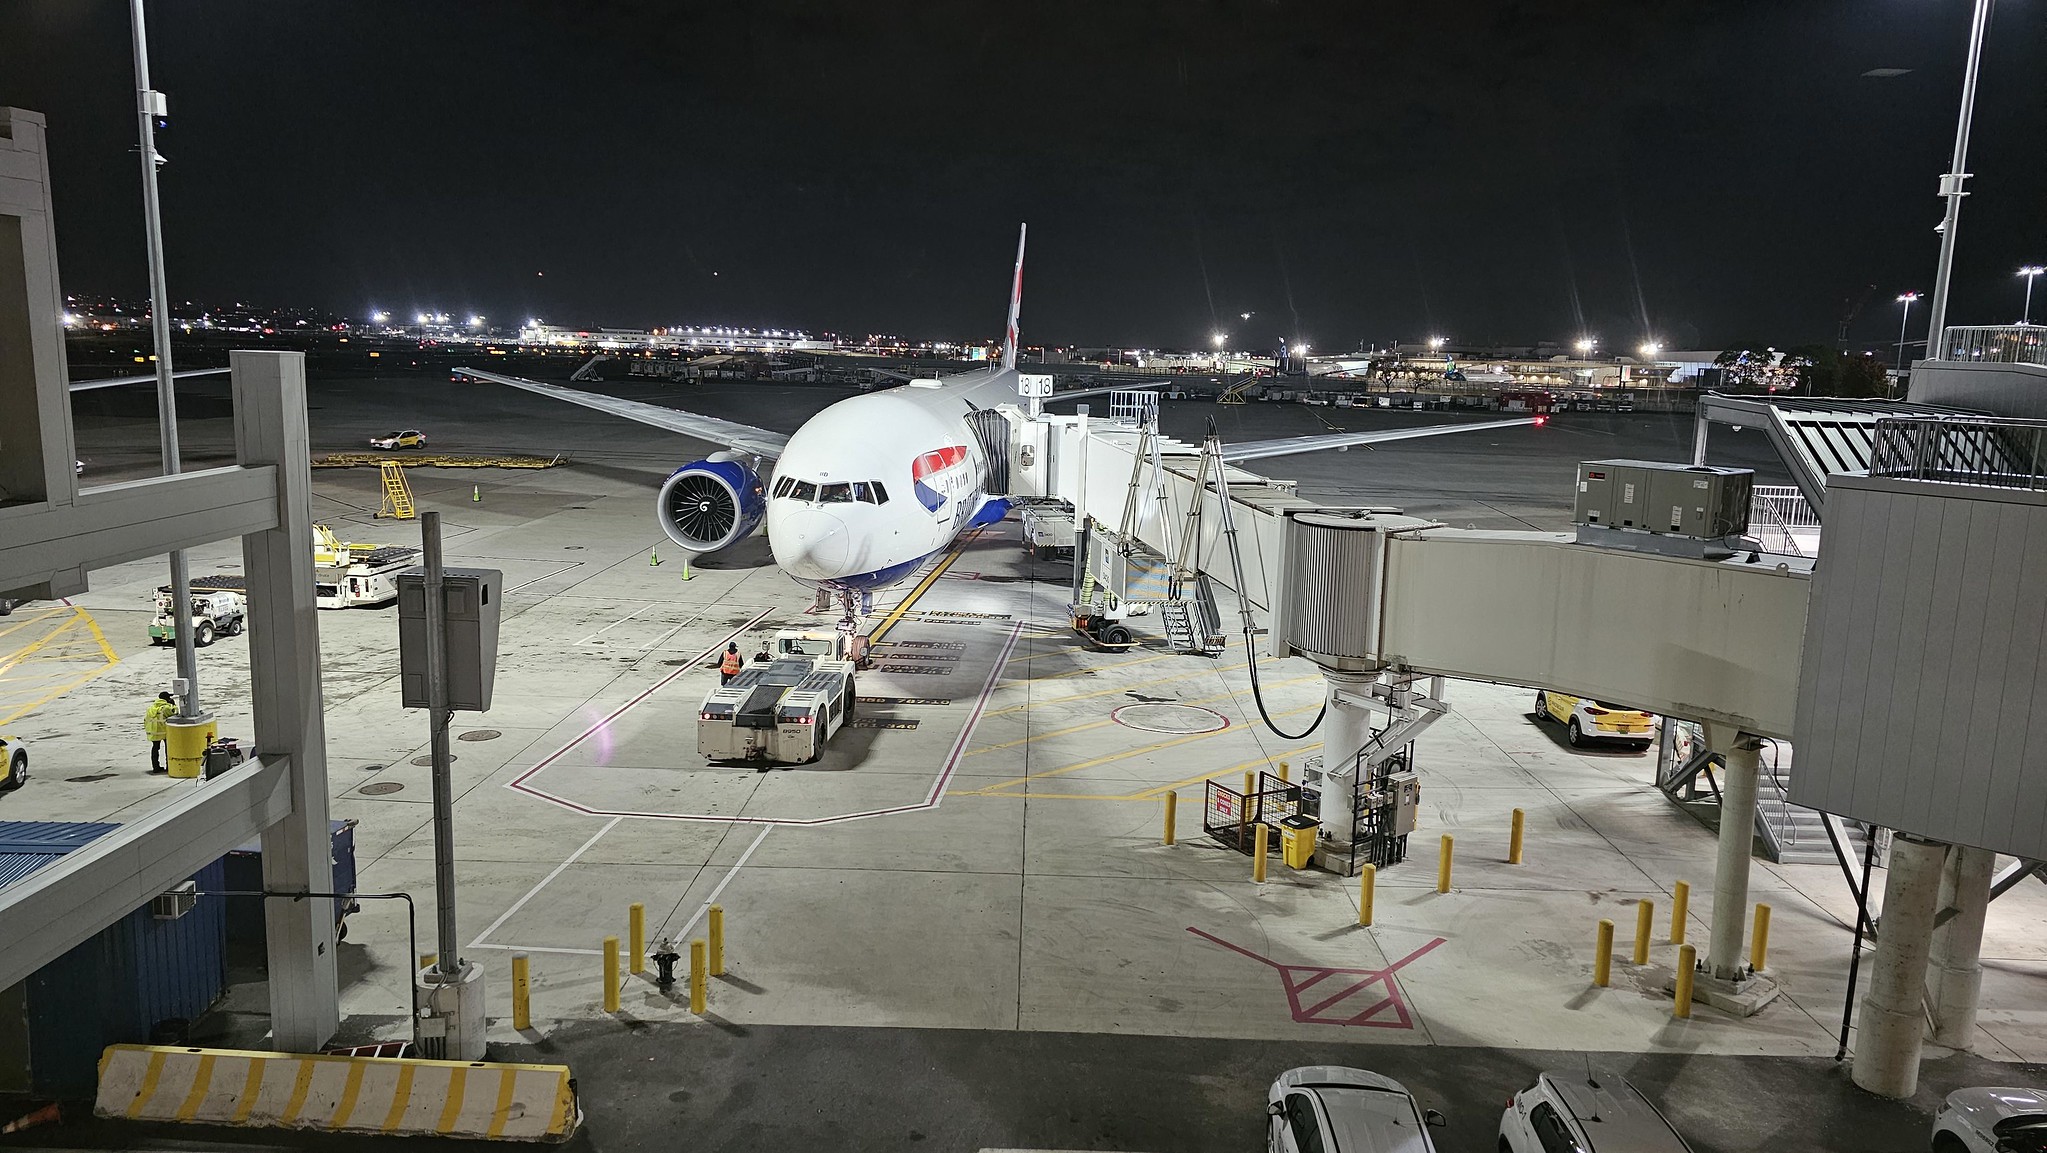 The BA 777-200 that brought me to New York